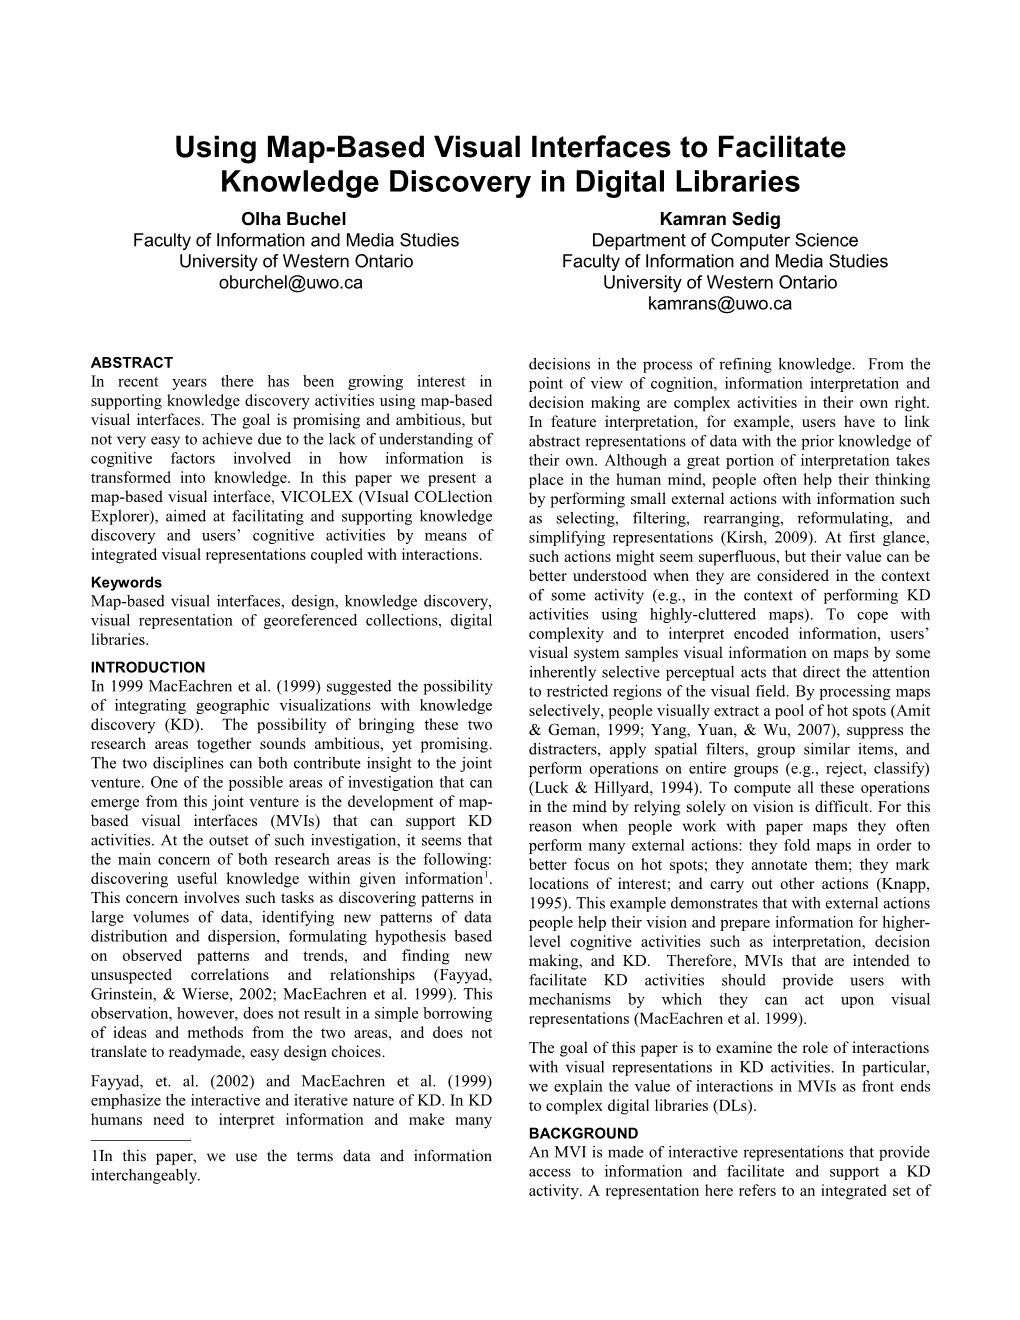 Using Map-Based Visual Interfaces to Facilitate Knowledge Discovery in Digital Libraries